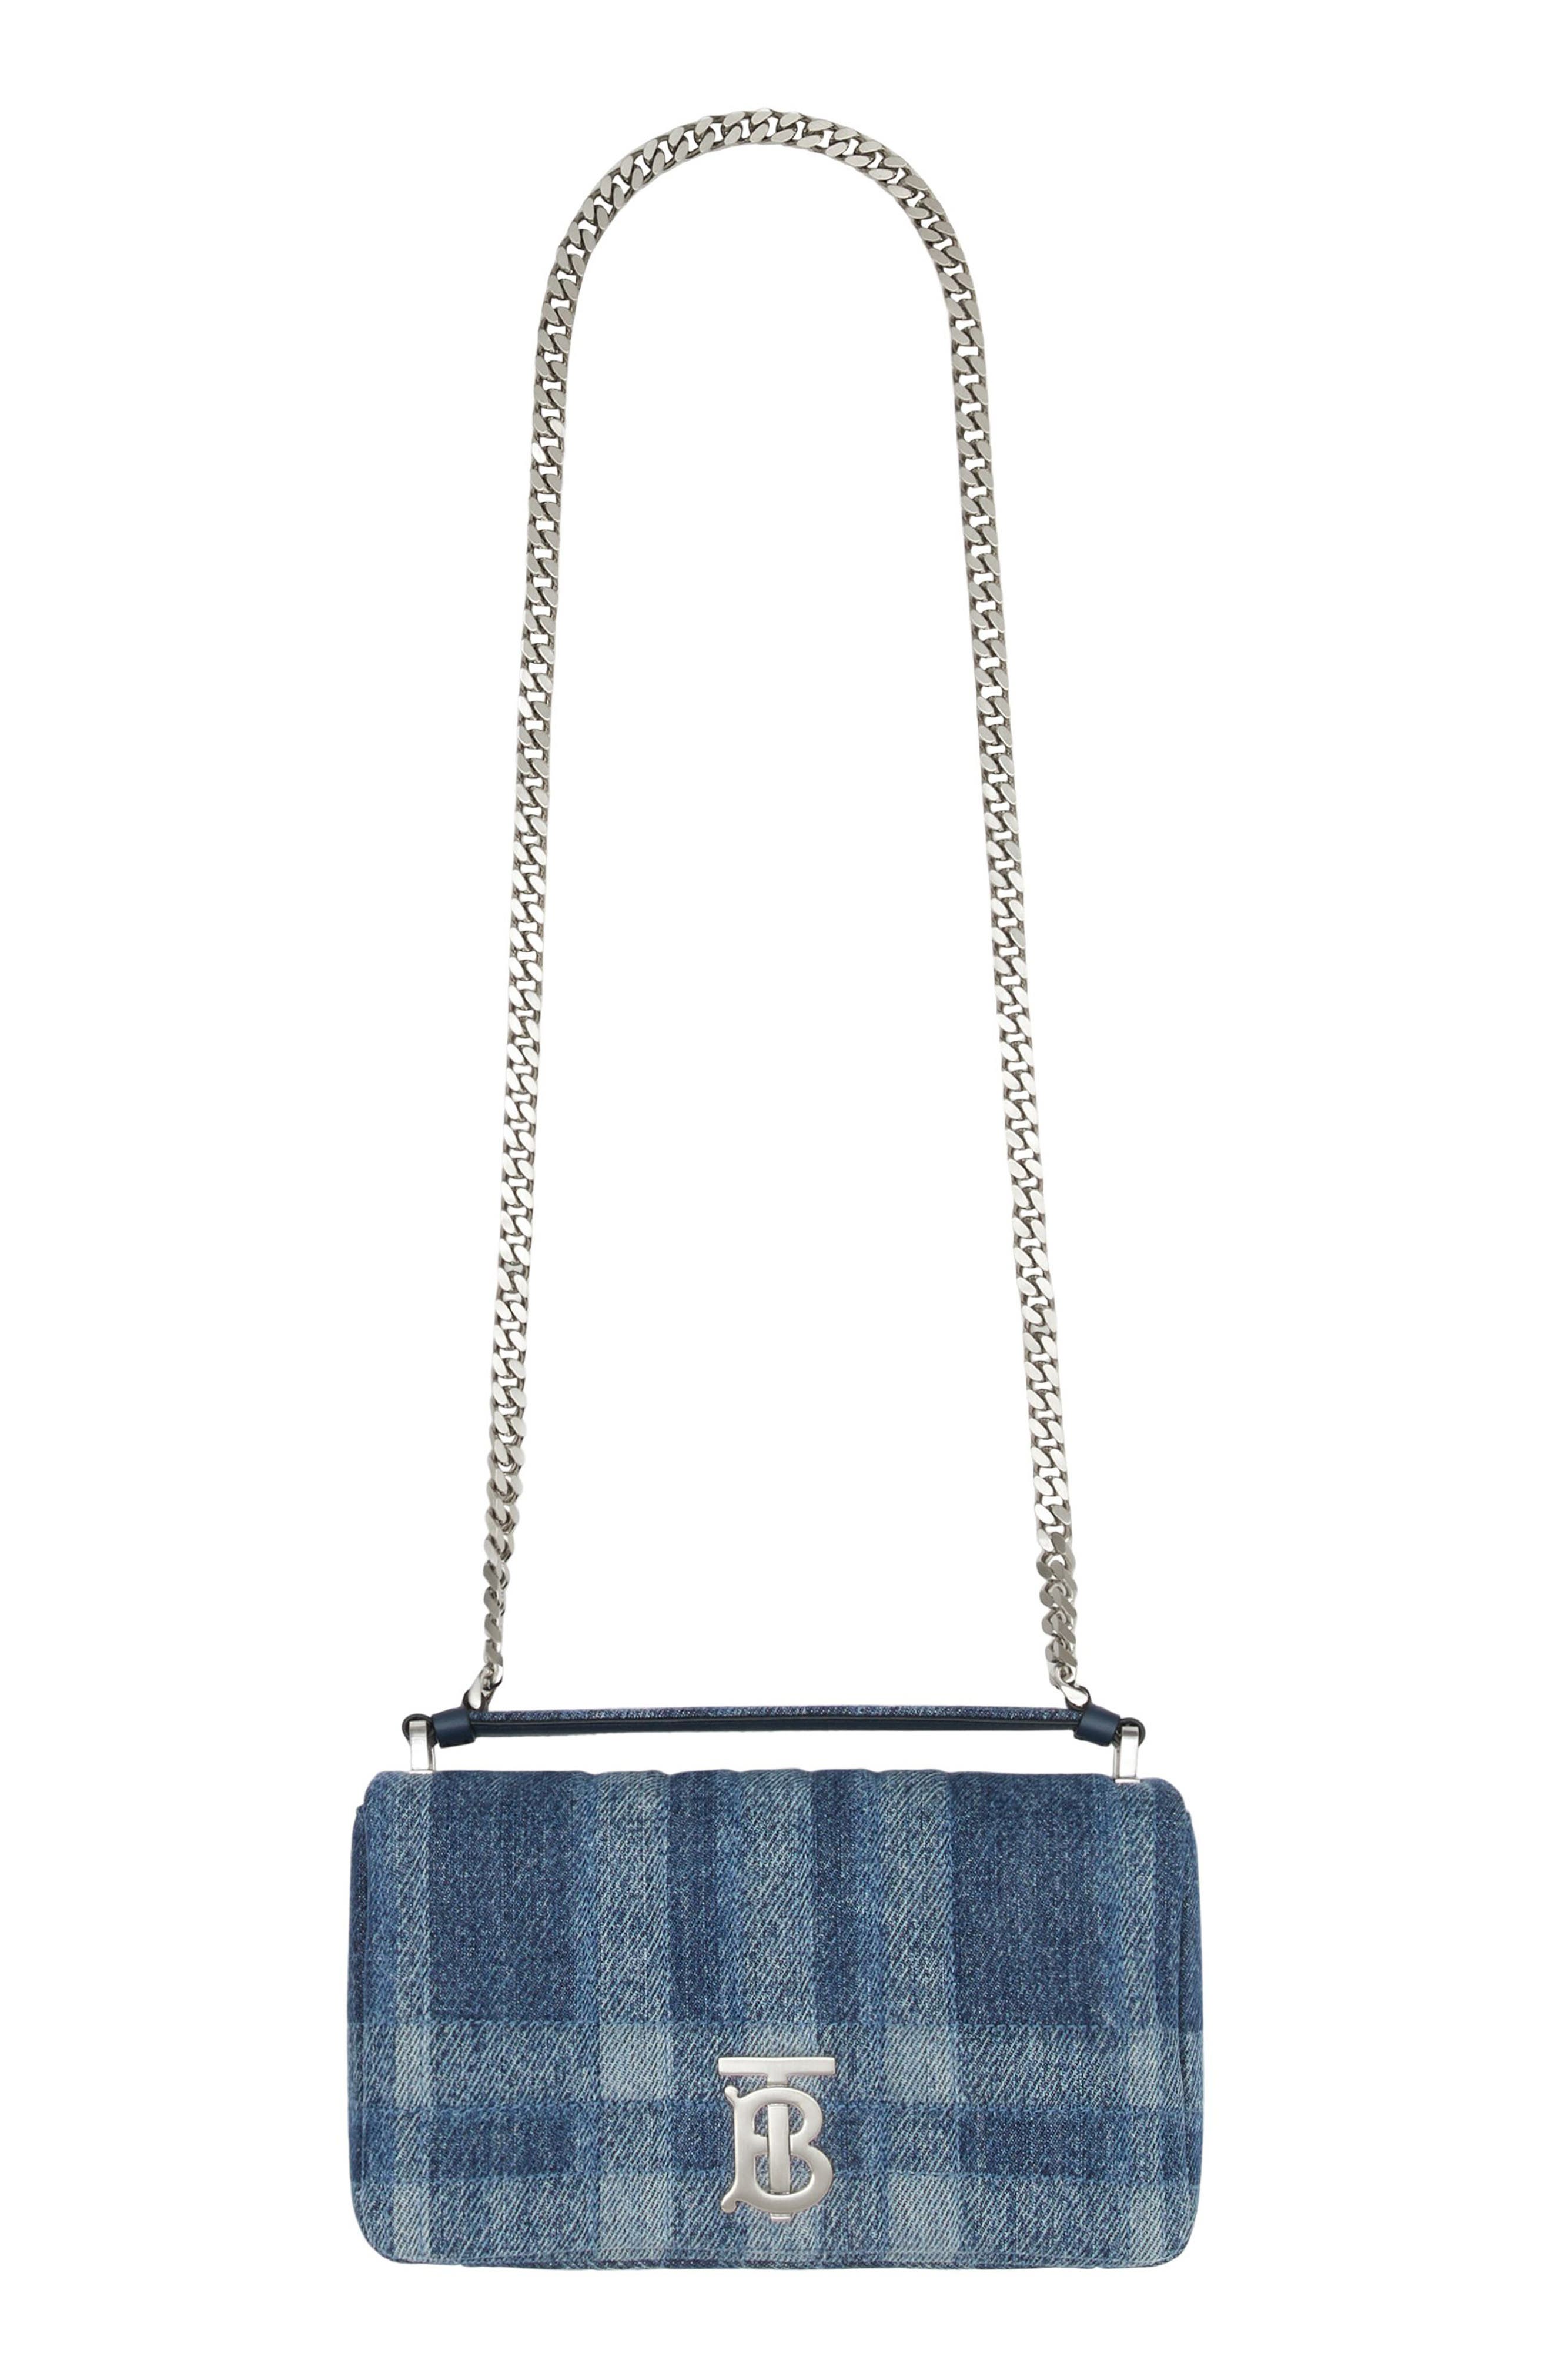 Burberry Small Lola Quilted Denim Crossbody Bag in Blue at Nordstrom